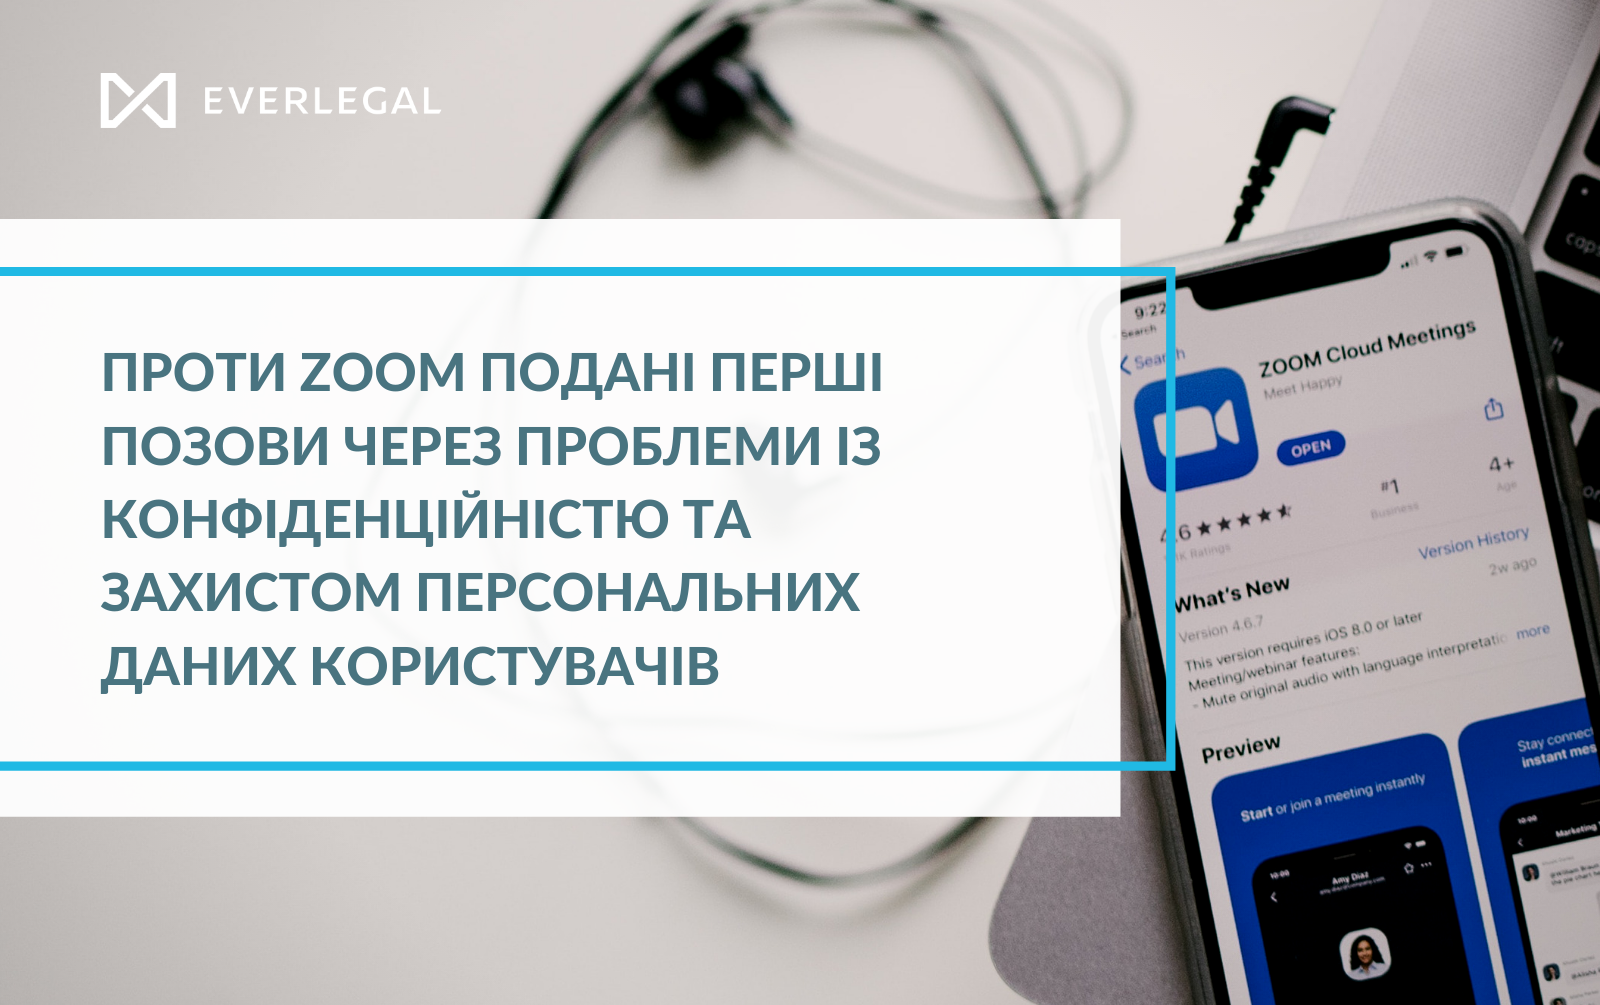 The first lawsuits have been filed against Zoom due to privacy issues and the protection of users' personal data